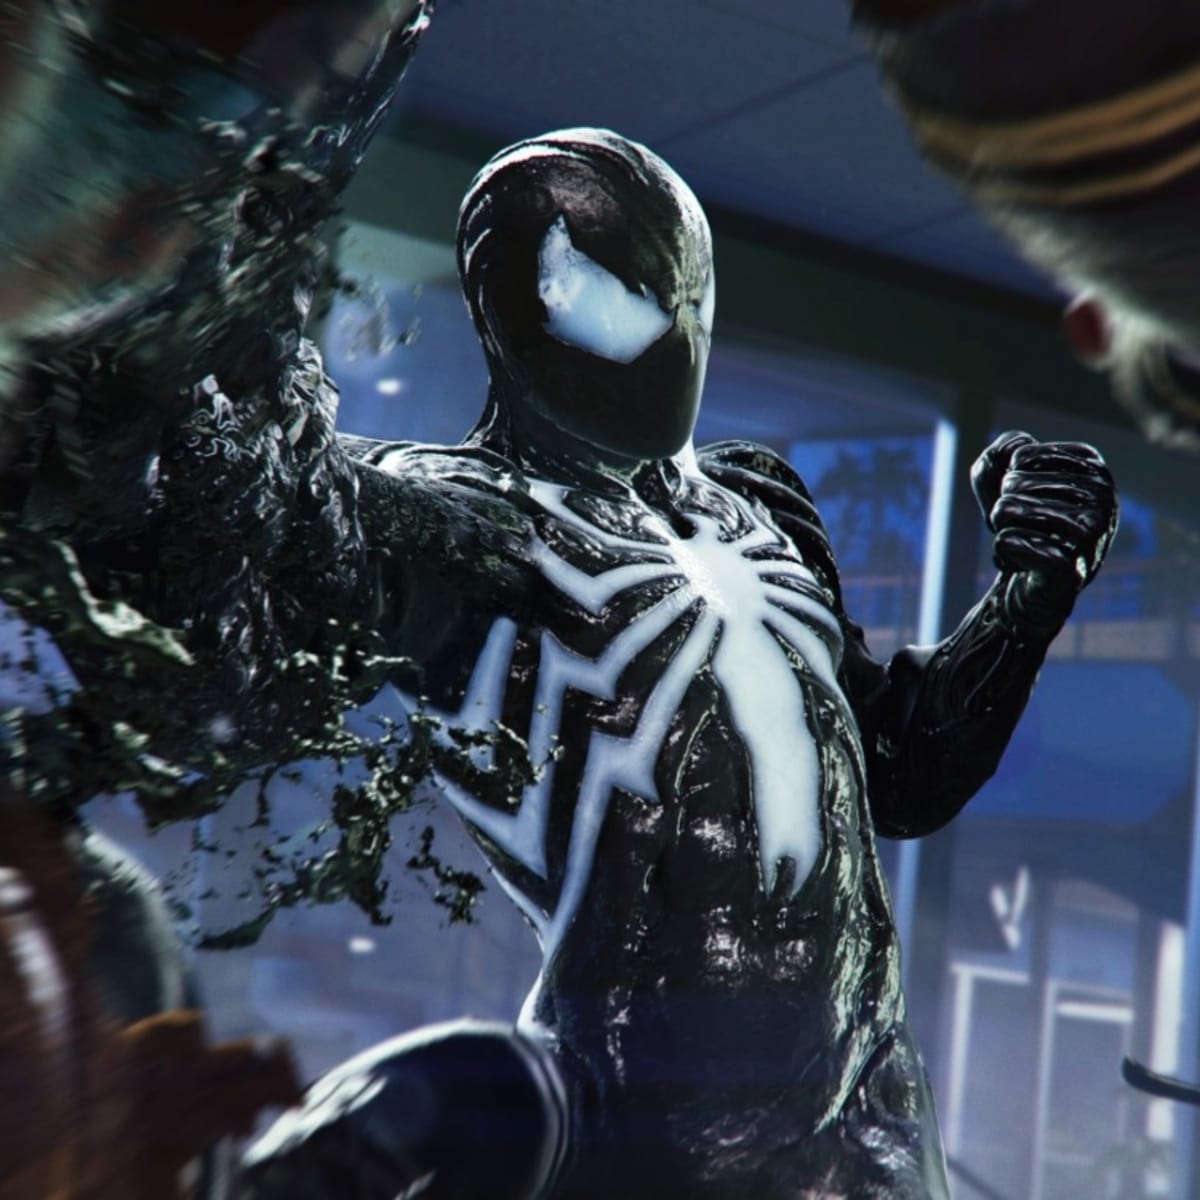 No patch or internet connection required to play Marvel's Spider